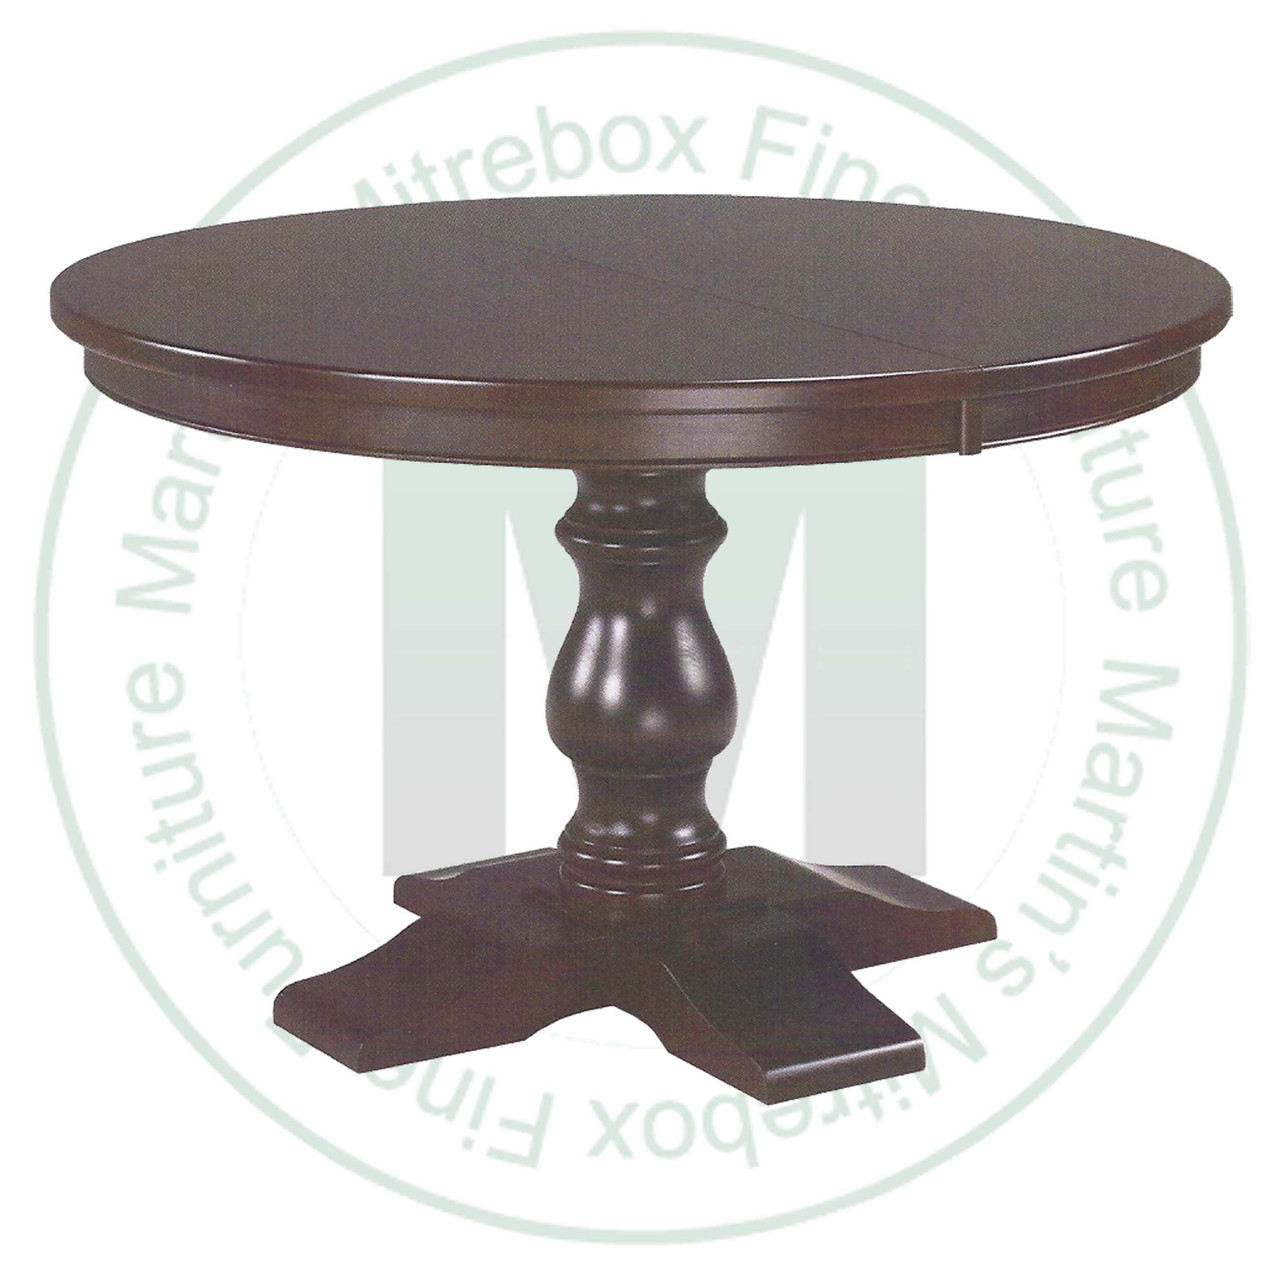 Wormy Maple Savannah Single Pedestal Table 42''D x 42''W x 30''H With 2 - 12'' Leaves Table